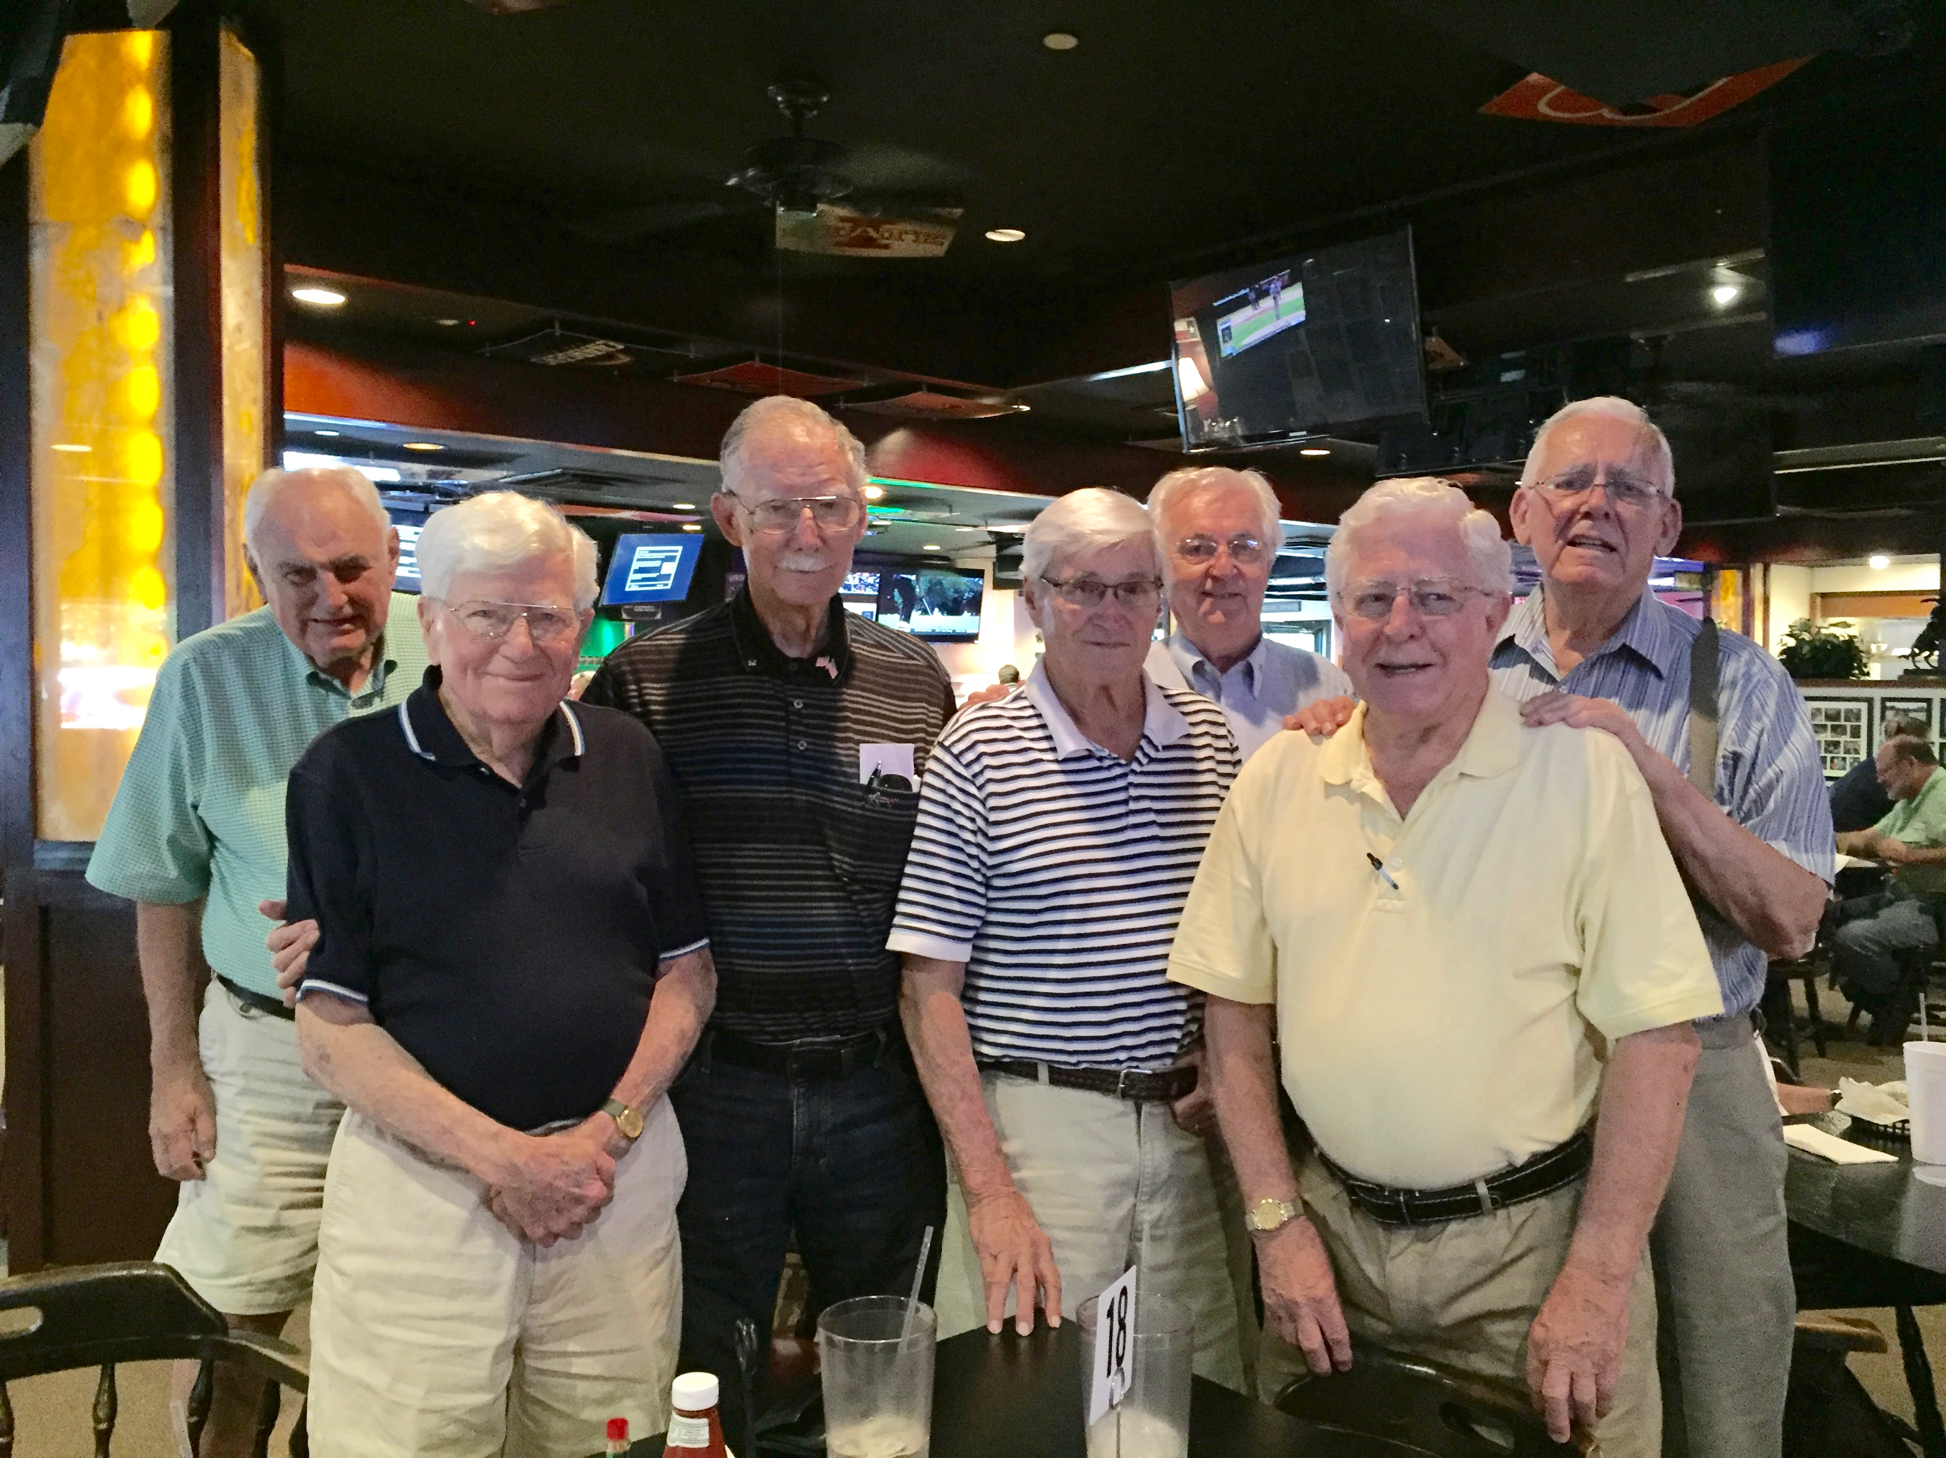 The Romeos at Midway Point included, from left, Phil Faulkner, Denis McMahon, Charlie Doyle, Joe Bates, Richard Welch, Bob Kelly and Roger Nolan. (Photo by Lauren Law)